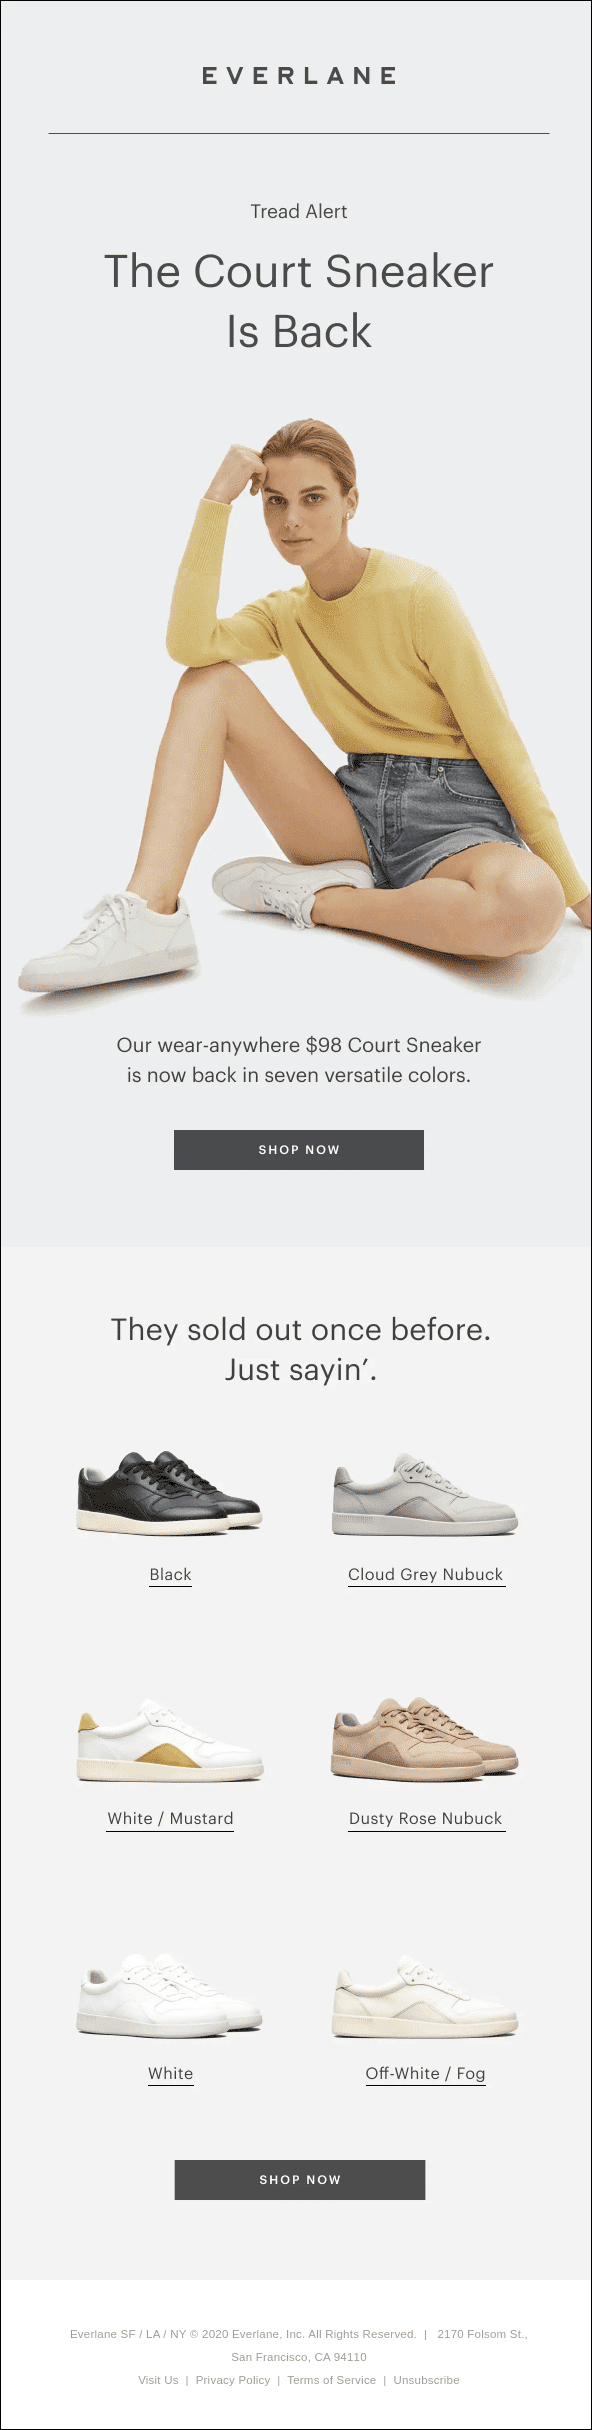 Everlane shows the different colors which are back in stock again